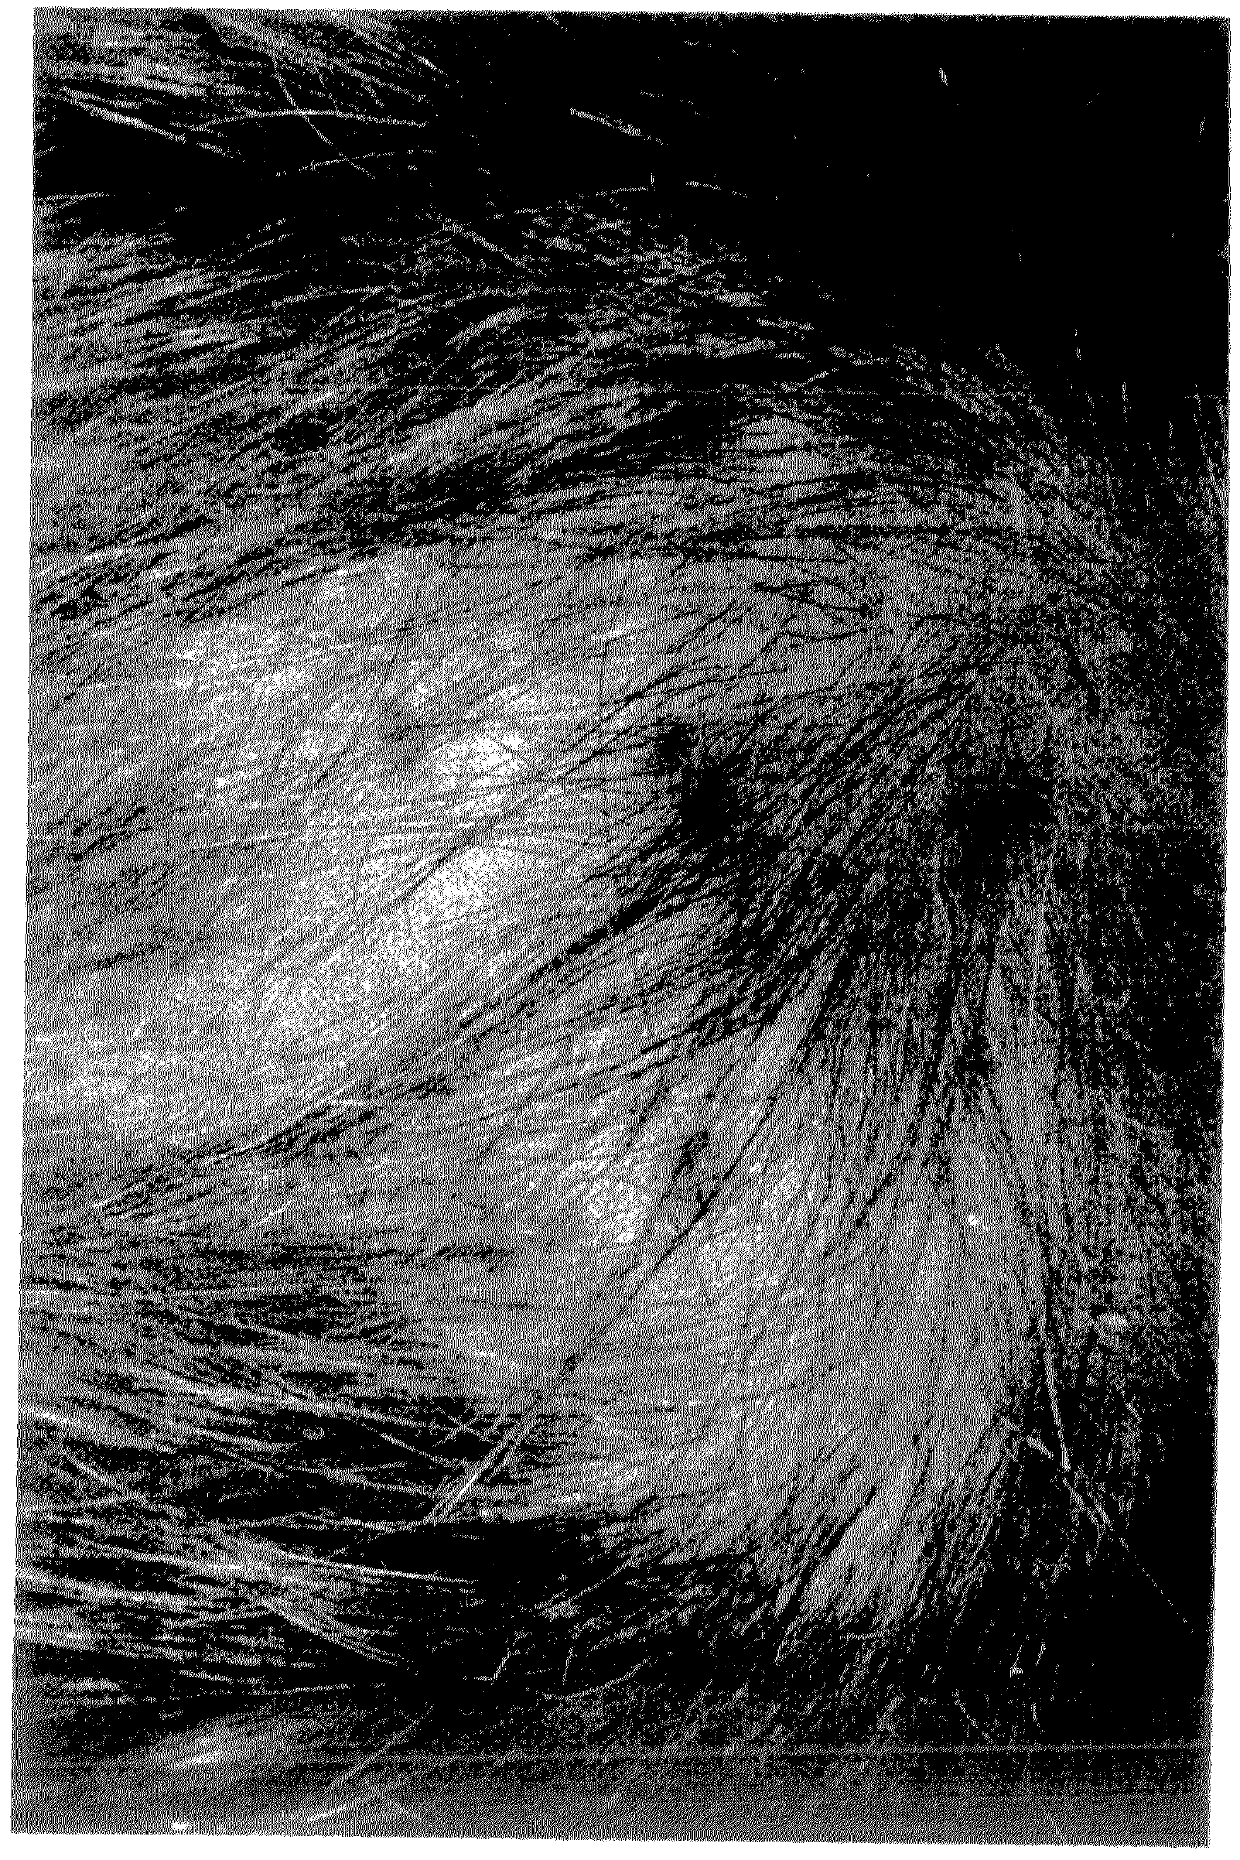 Composition comprising resveratrol and melatonin for reducing hair loss and/or increasing hair regrowth